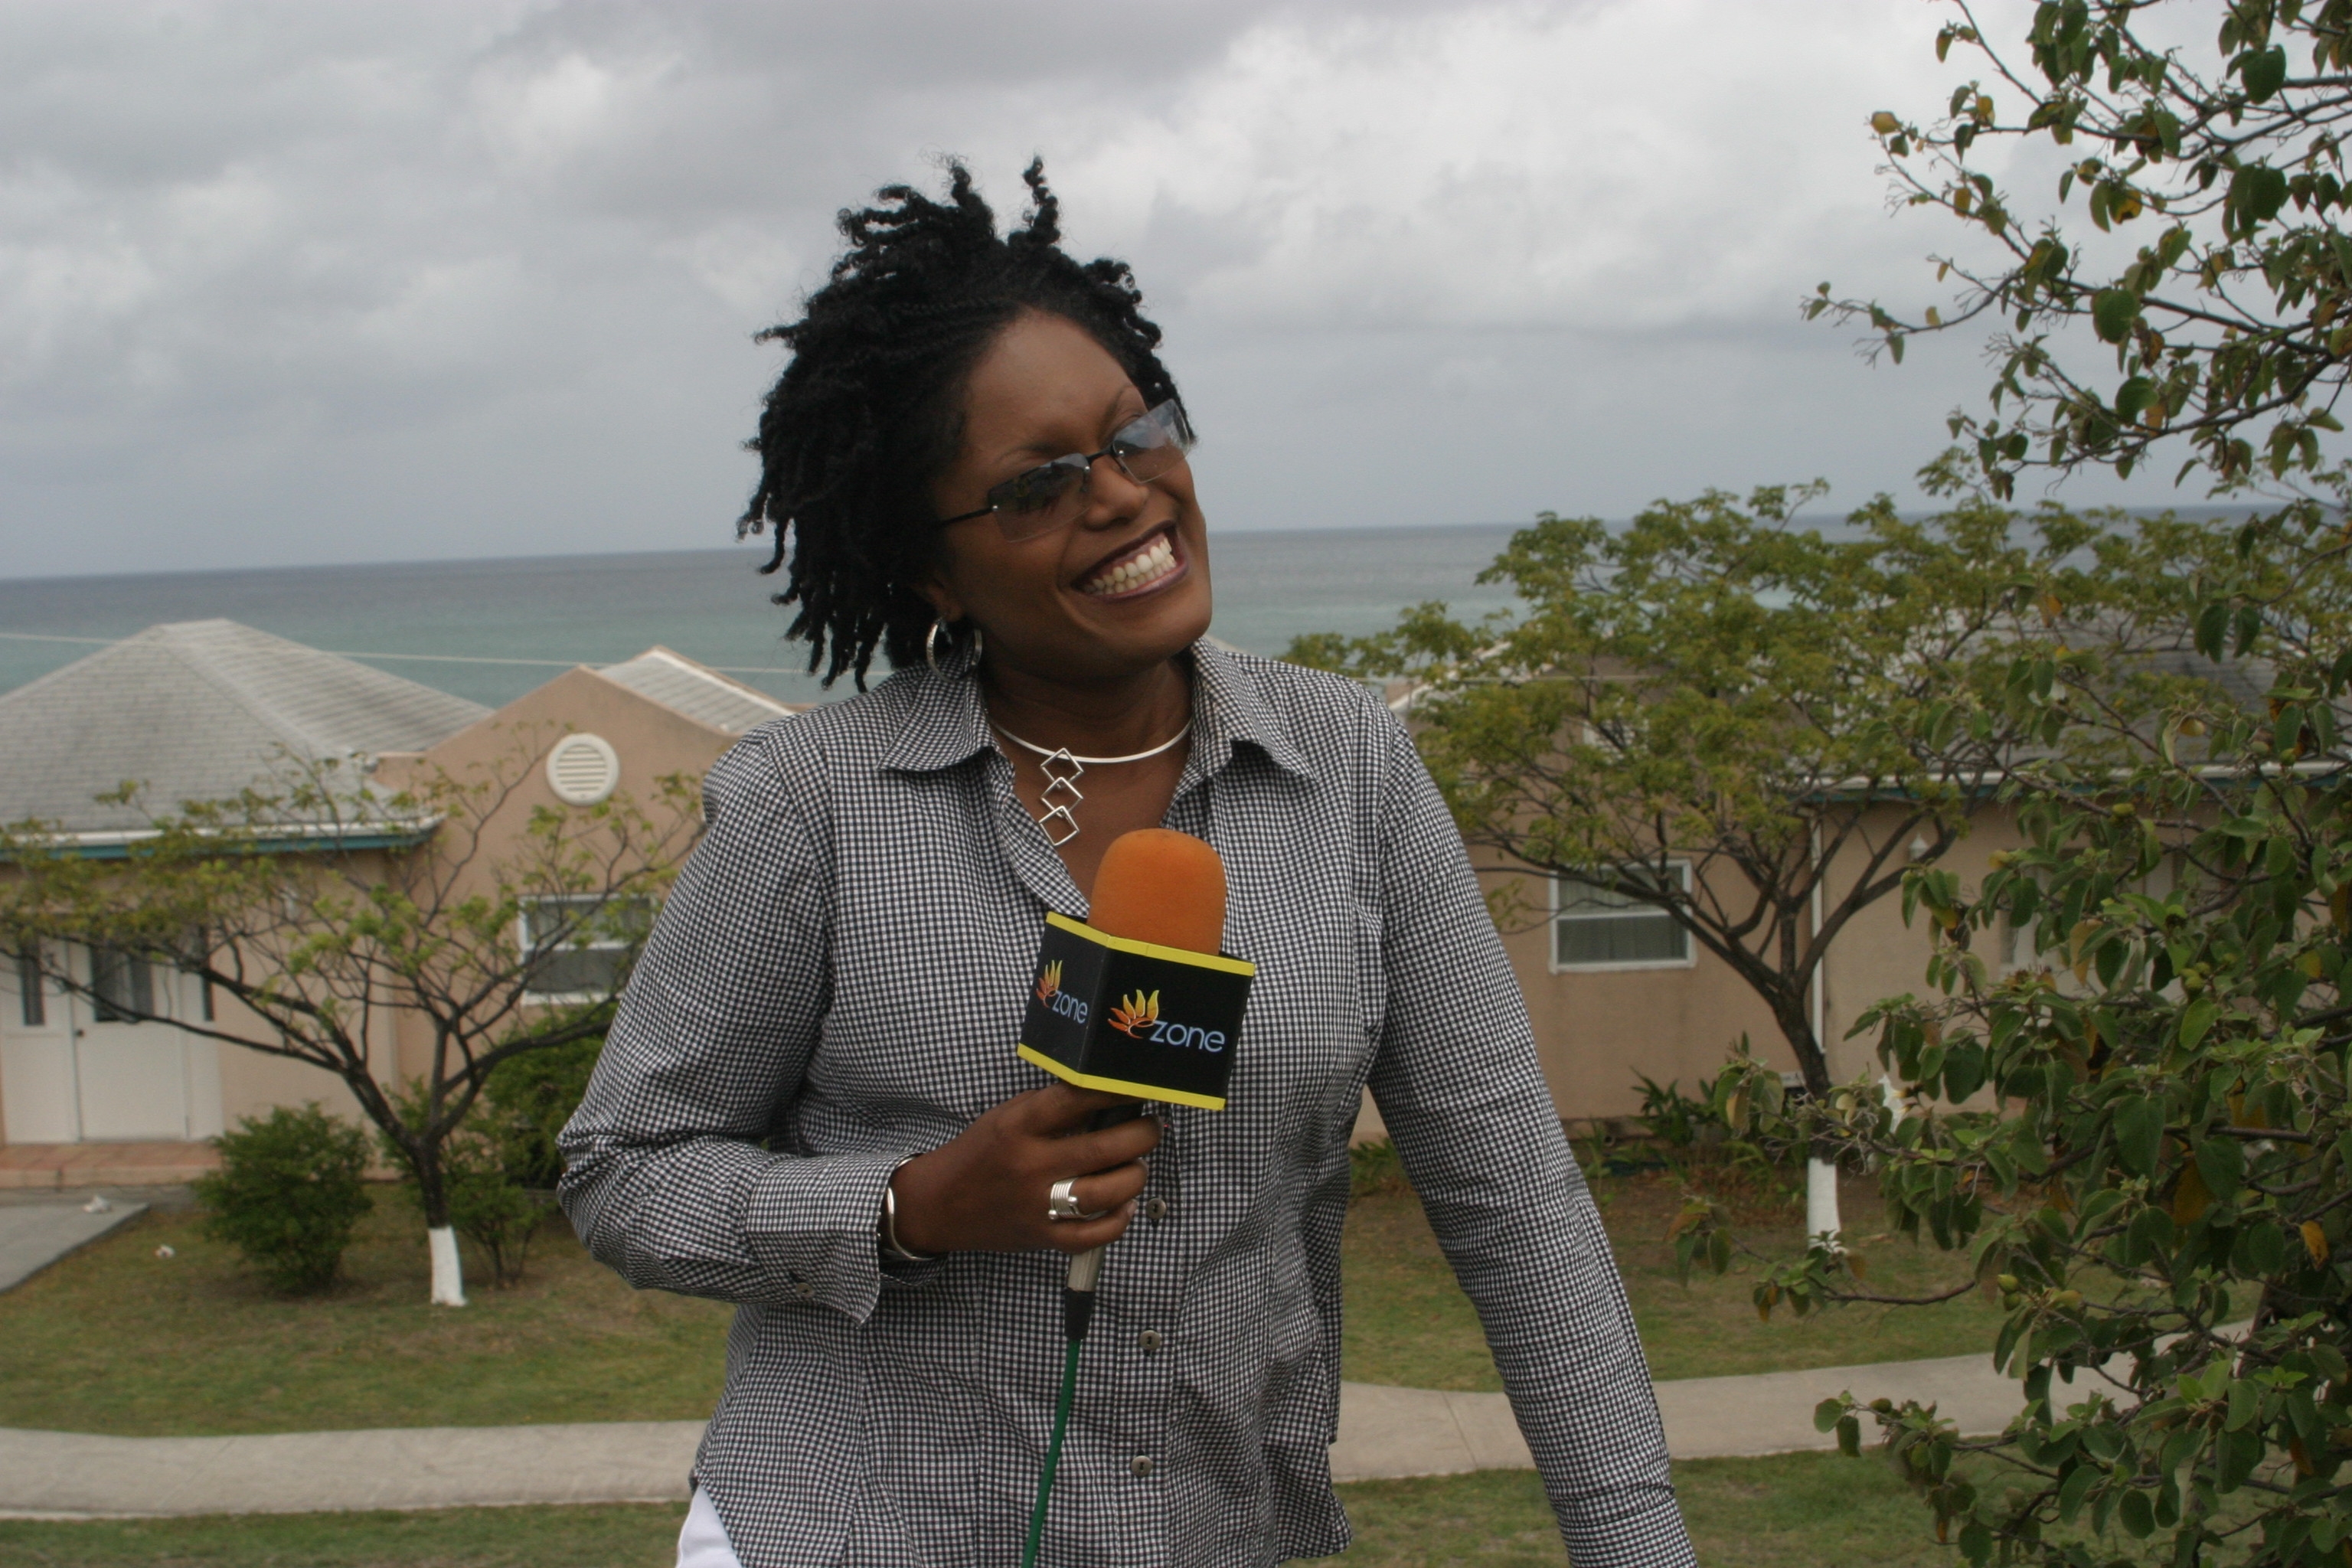 On Location in Nevis